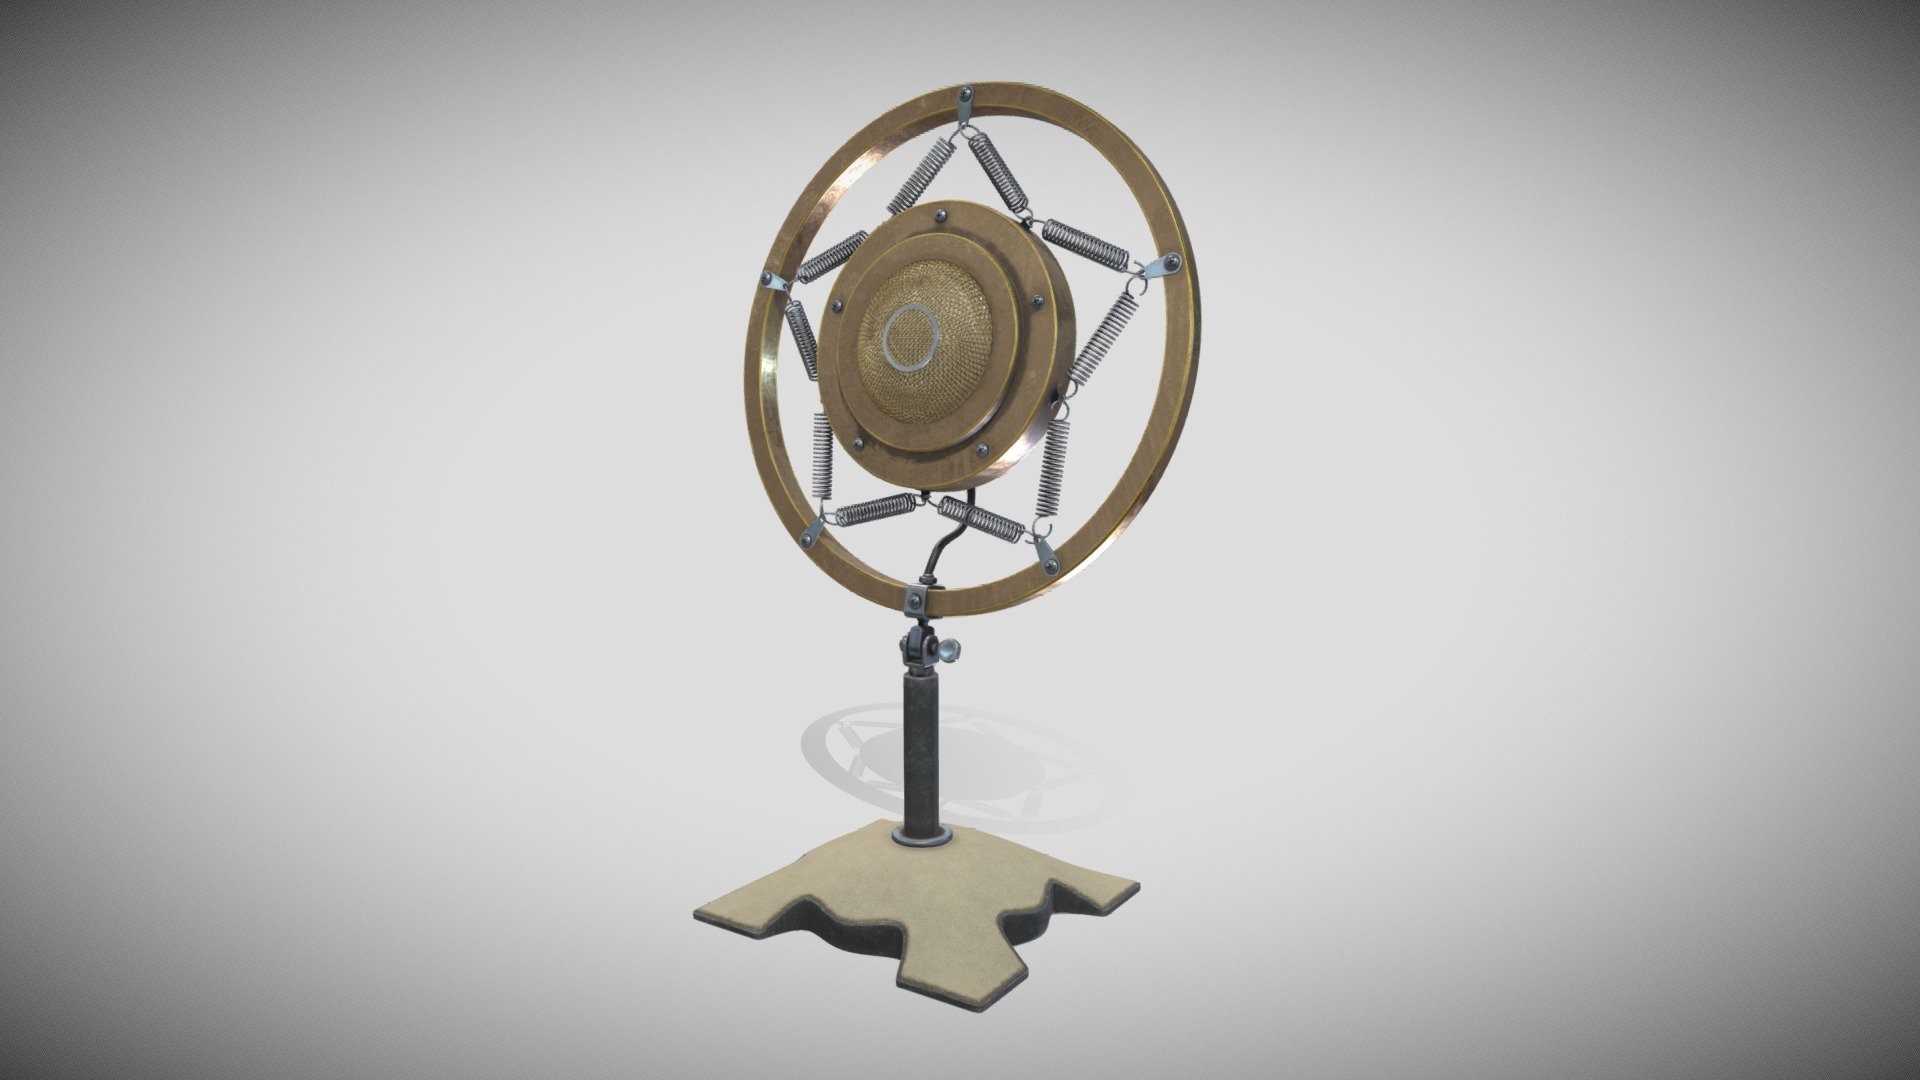 One Material PBR Metalness 4k

High Poly, mainly quads - Old Microphone - Tondo_Mic - Buy Royalty Free 3D model by Francesco Coldesina (@topfrank2013) 3d model